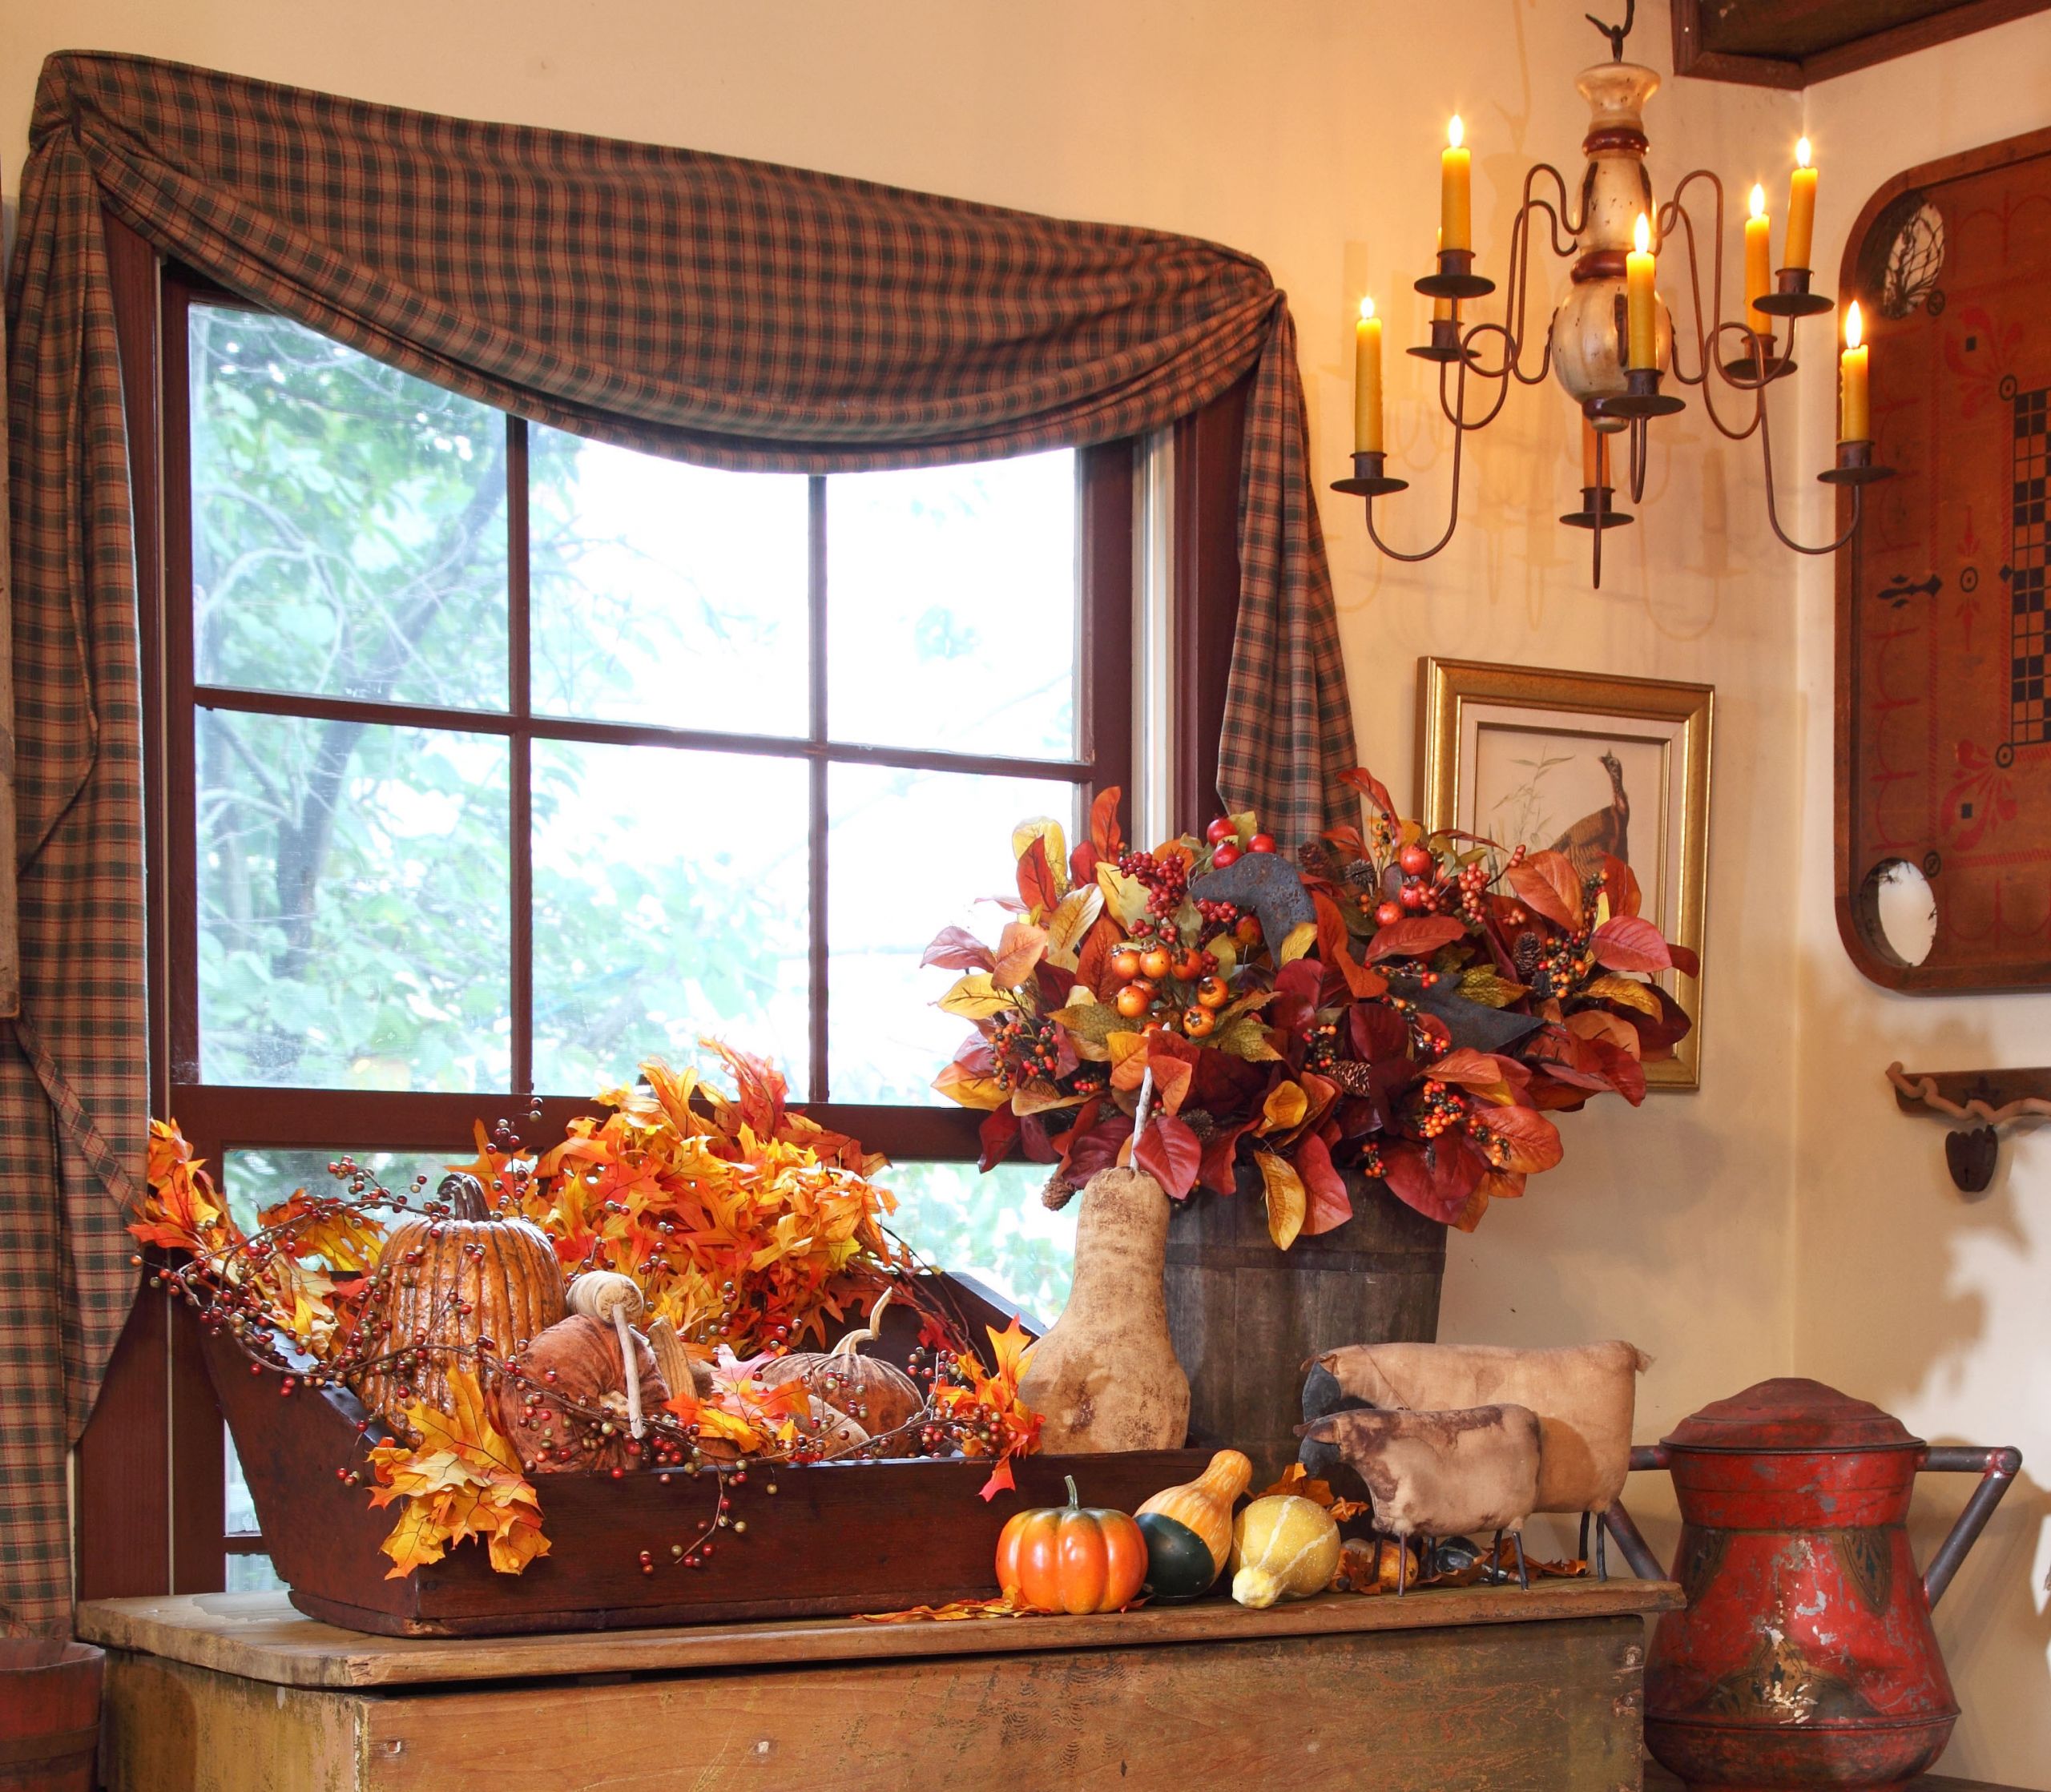 Fall Home Decor
 3 Quick Fall Decorating Tips